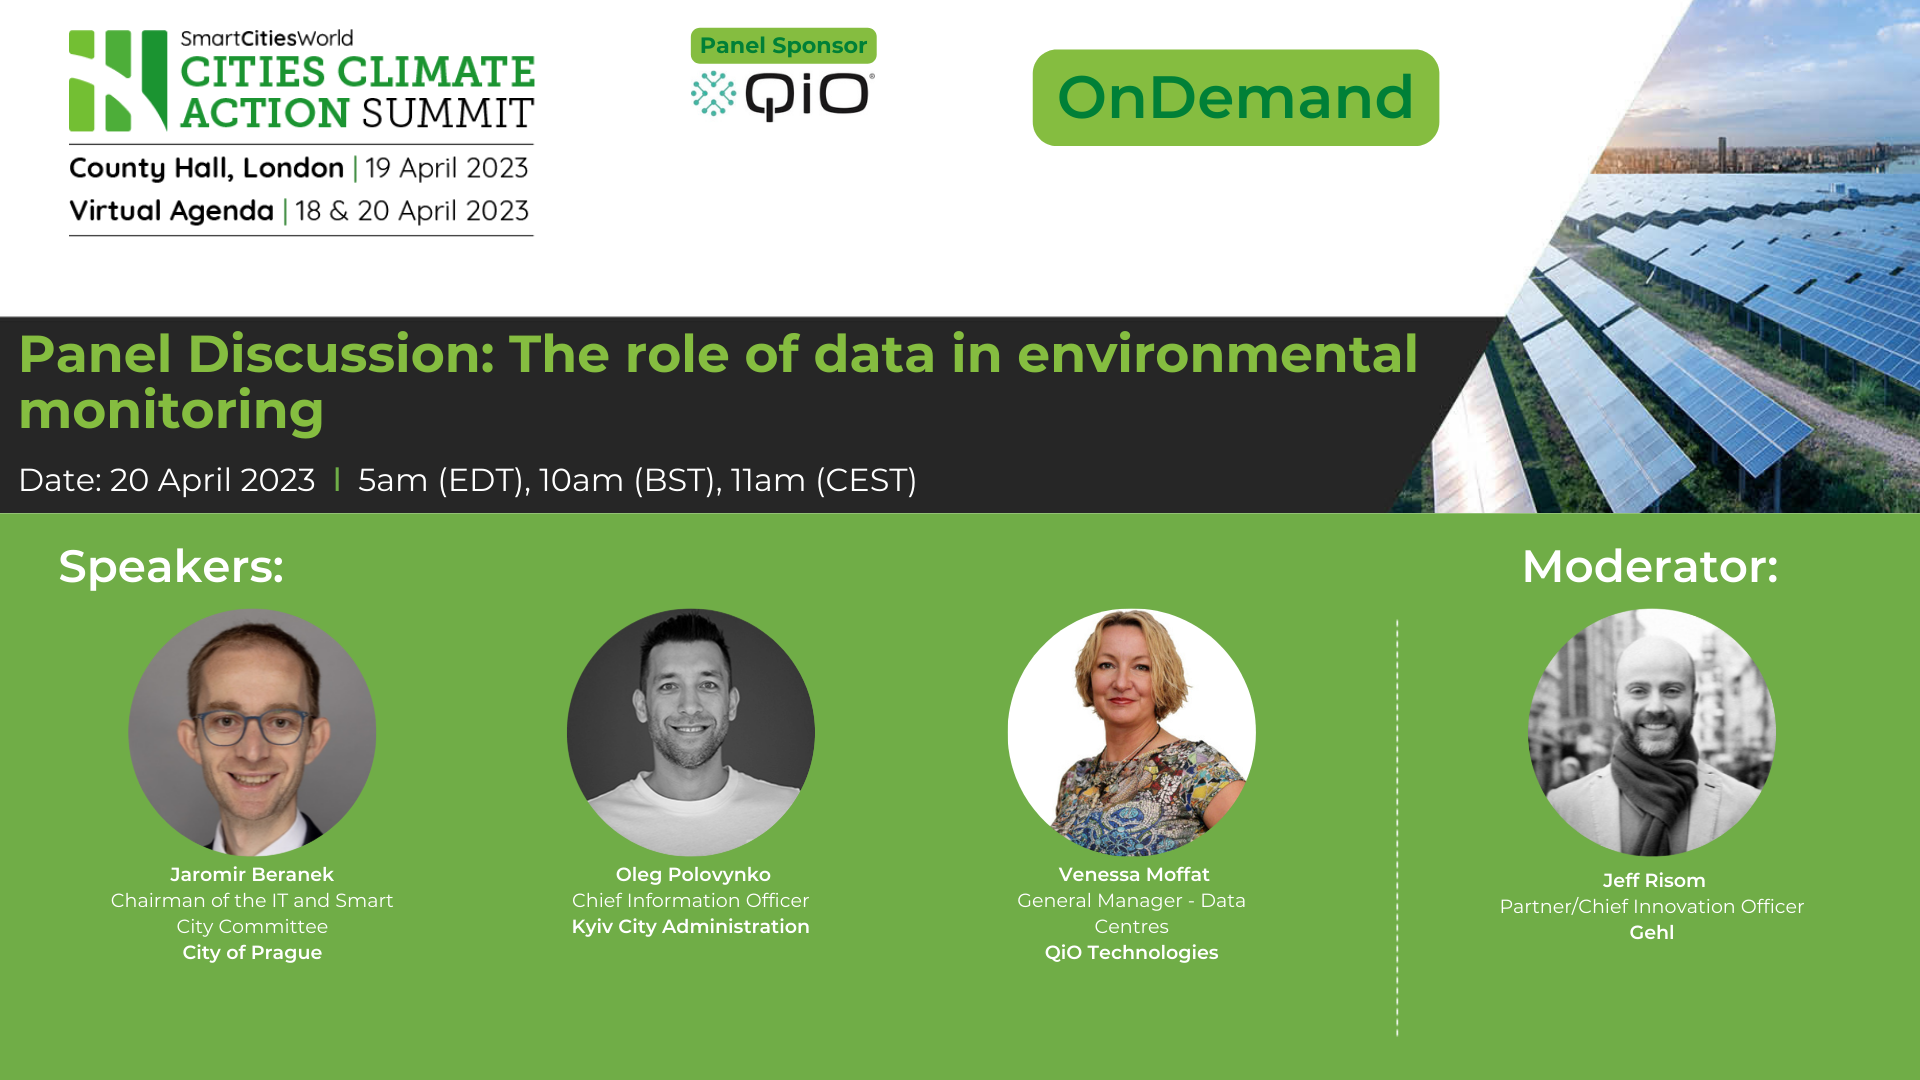 OnDemand Panel discussion: The role of data in environmental monitoring